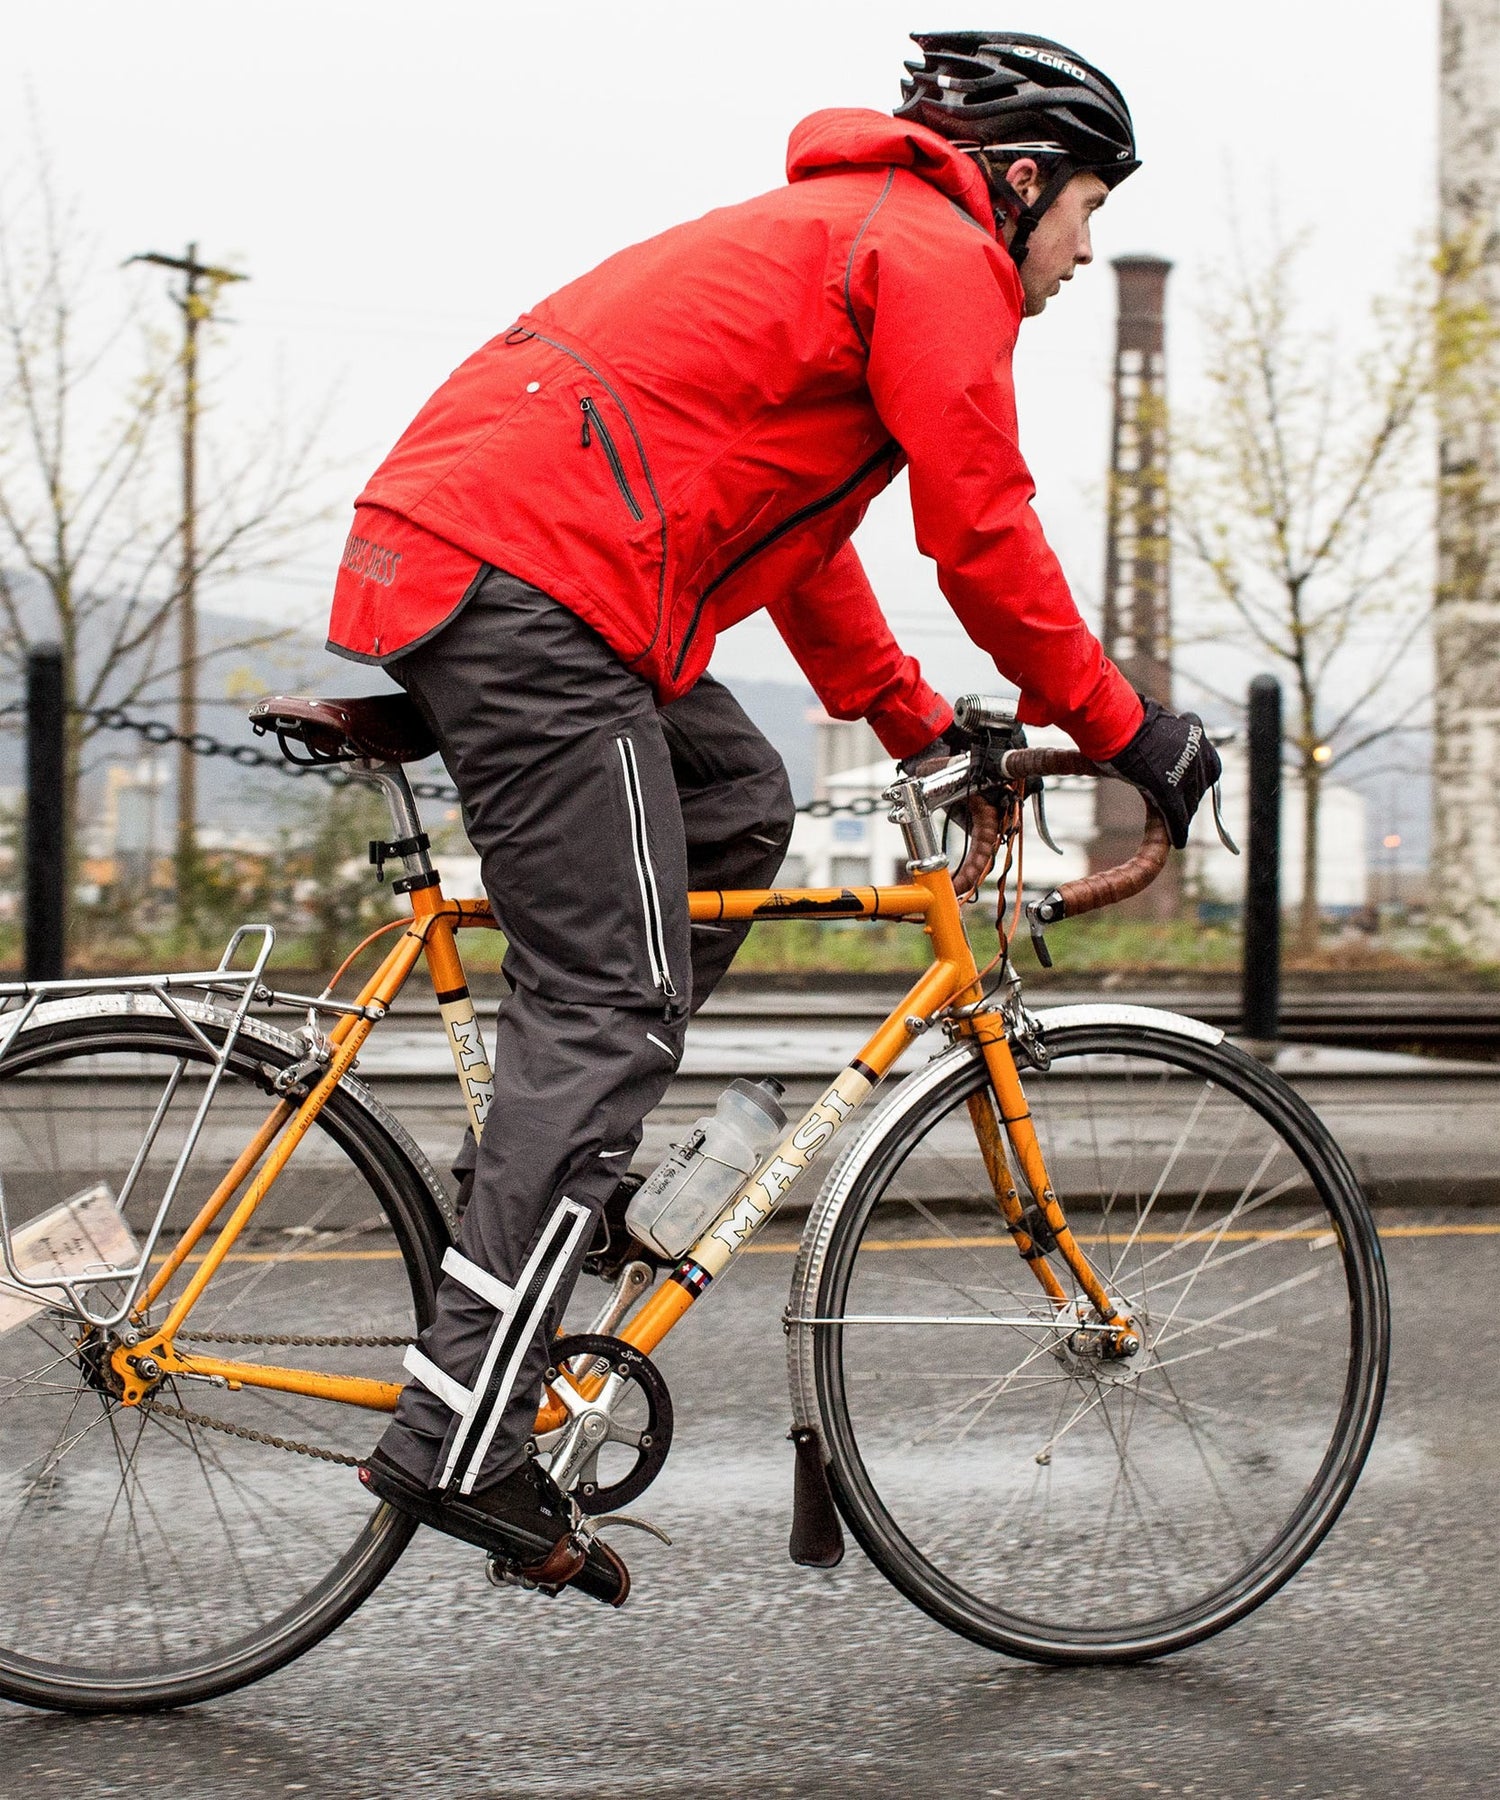 Urban Cycling Clothing | Ride & Arrive in Style | Vulpine